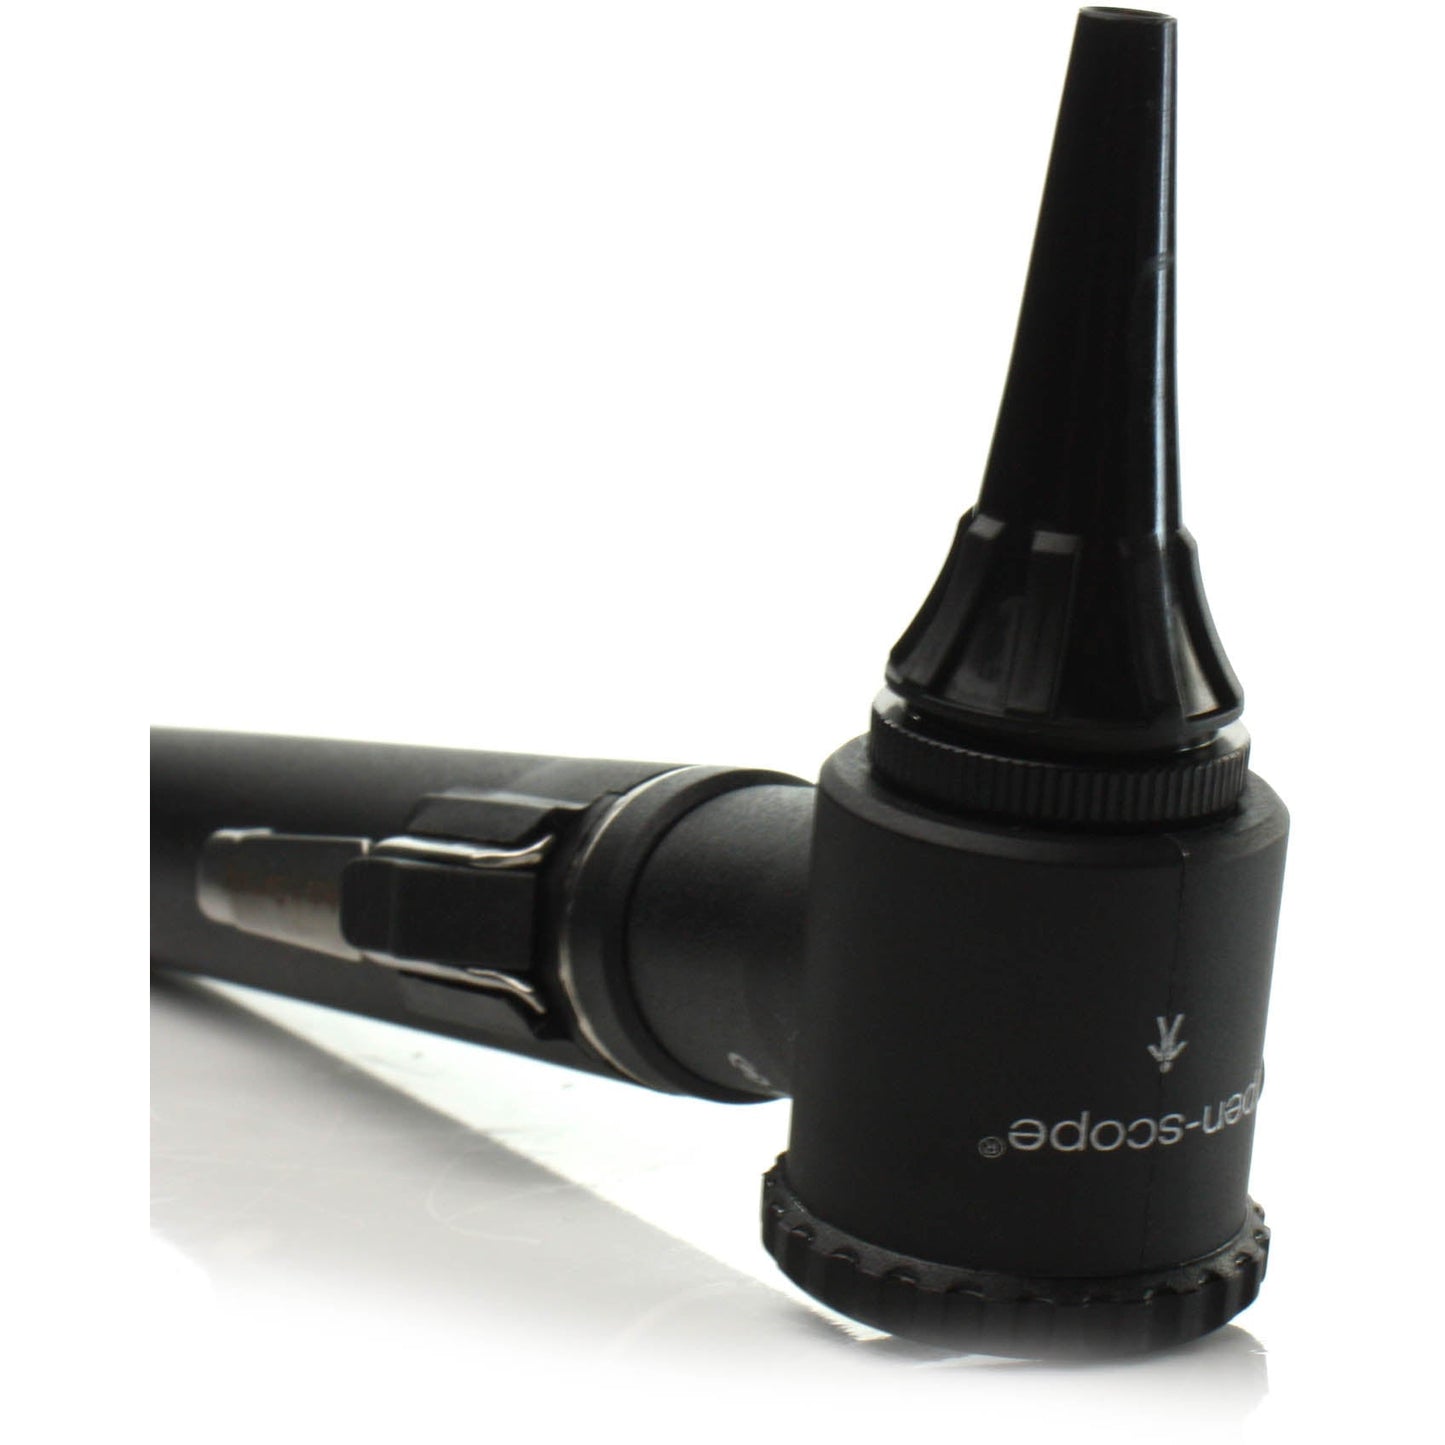 Riester Penscope Otoscope 2.7v with Pouch - Black